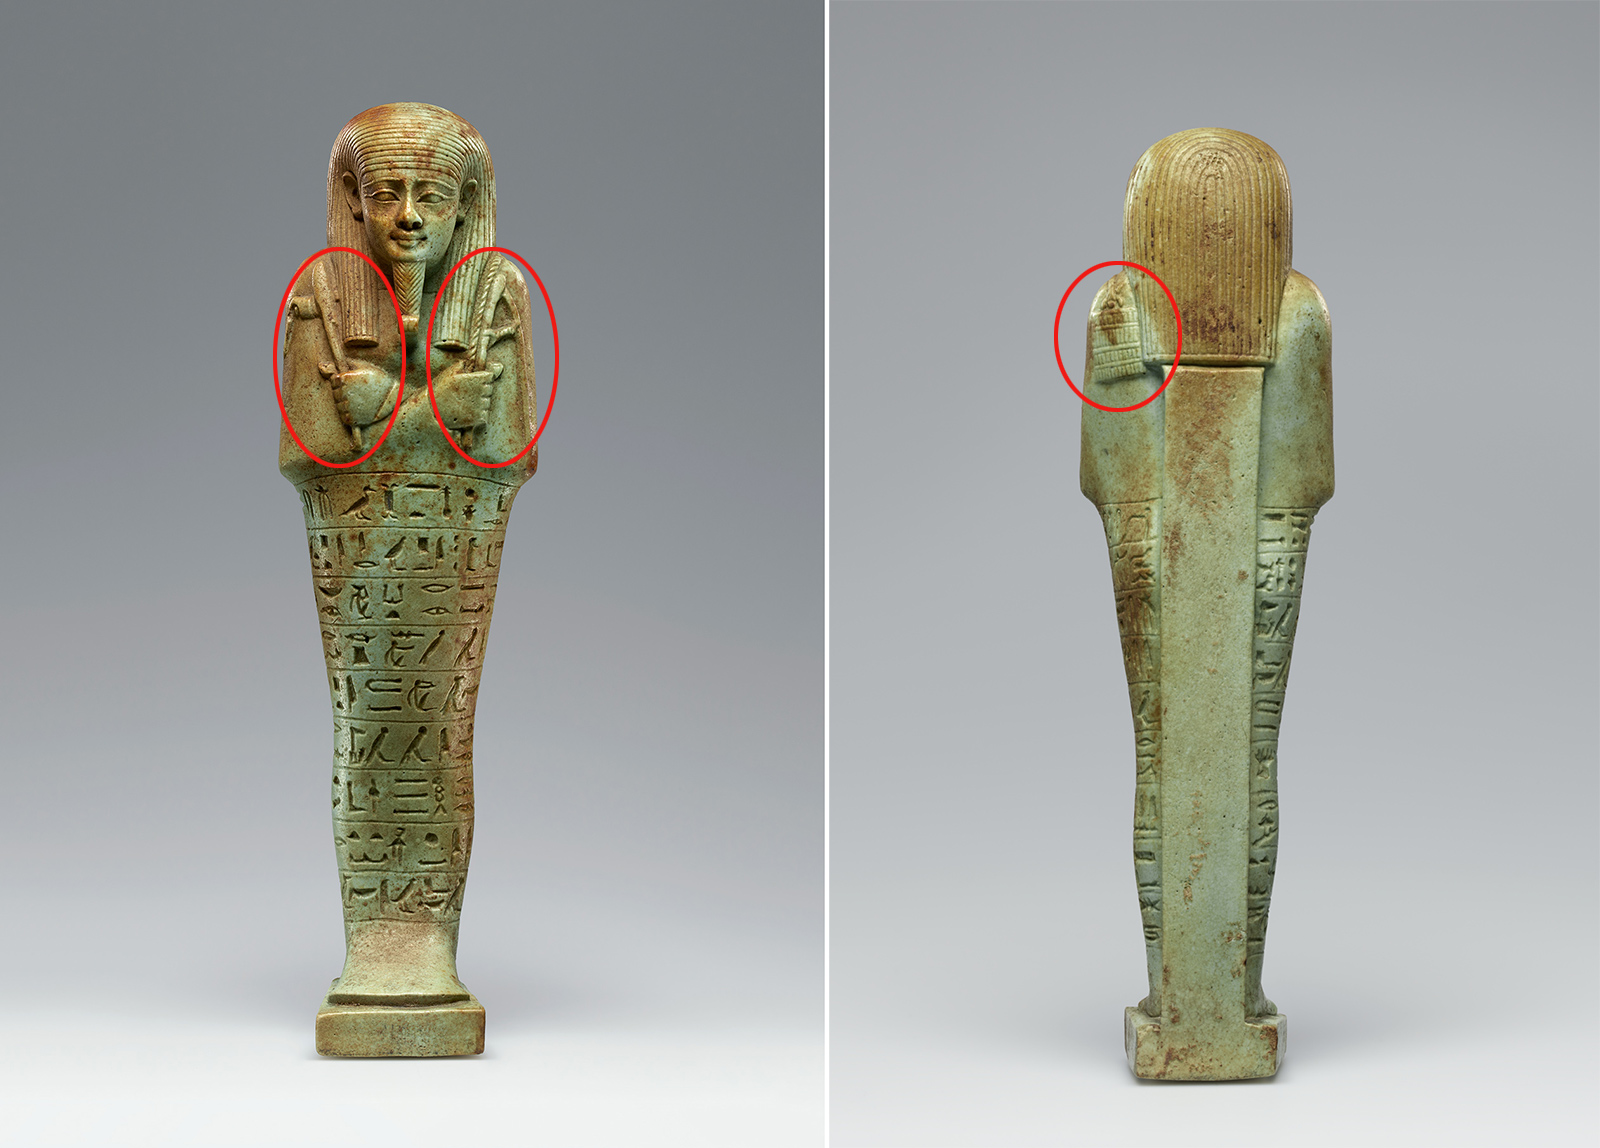 The ushabti for Neferibresaneith holds a hoe and a pick (left, circled) and a bag of seeds (right, circled)